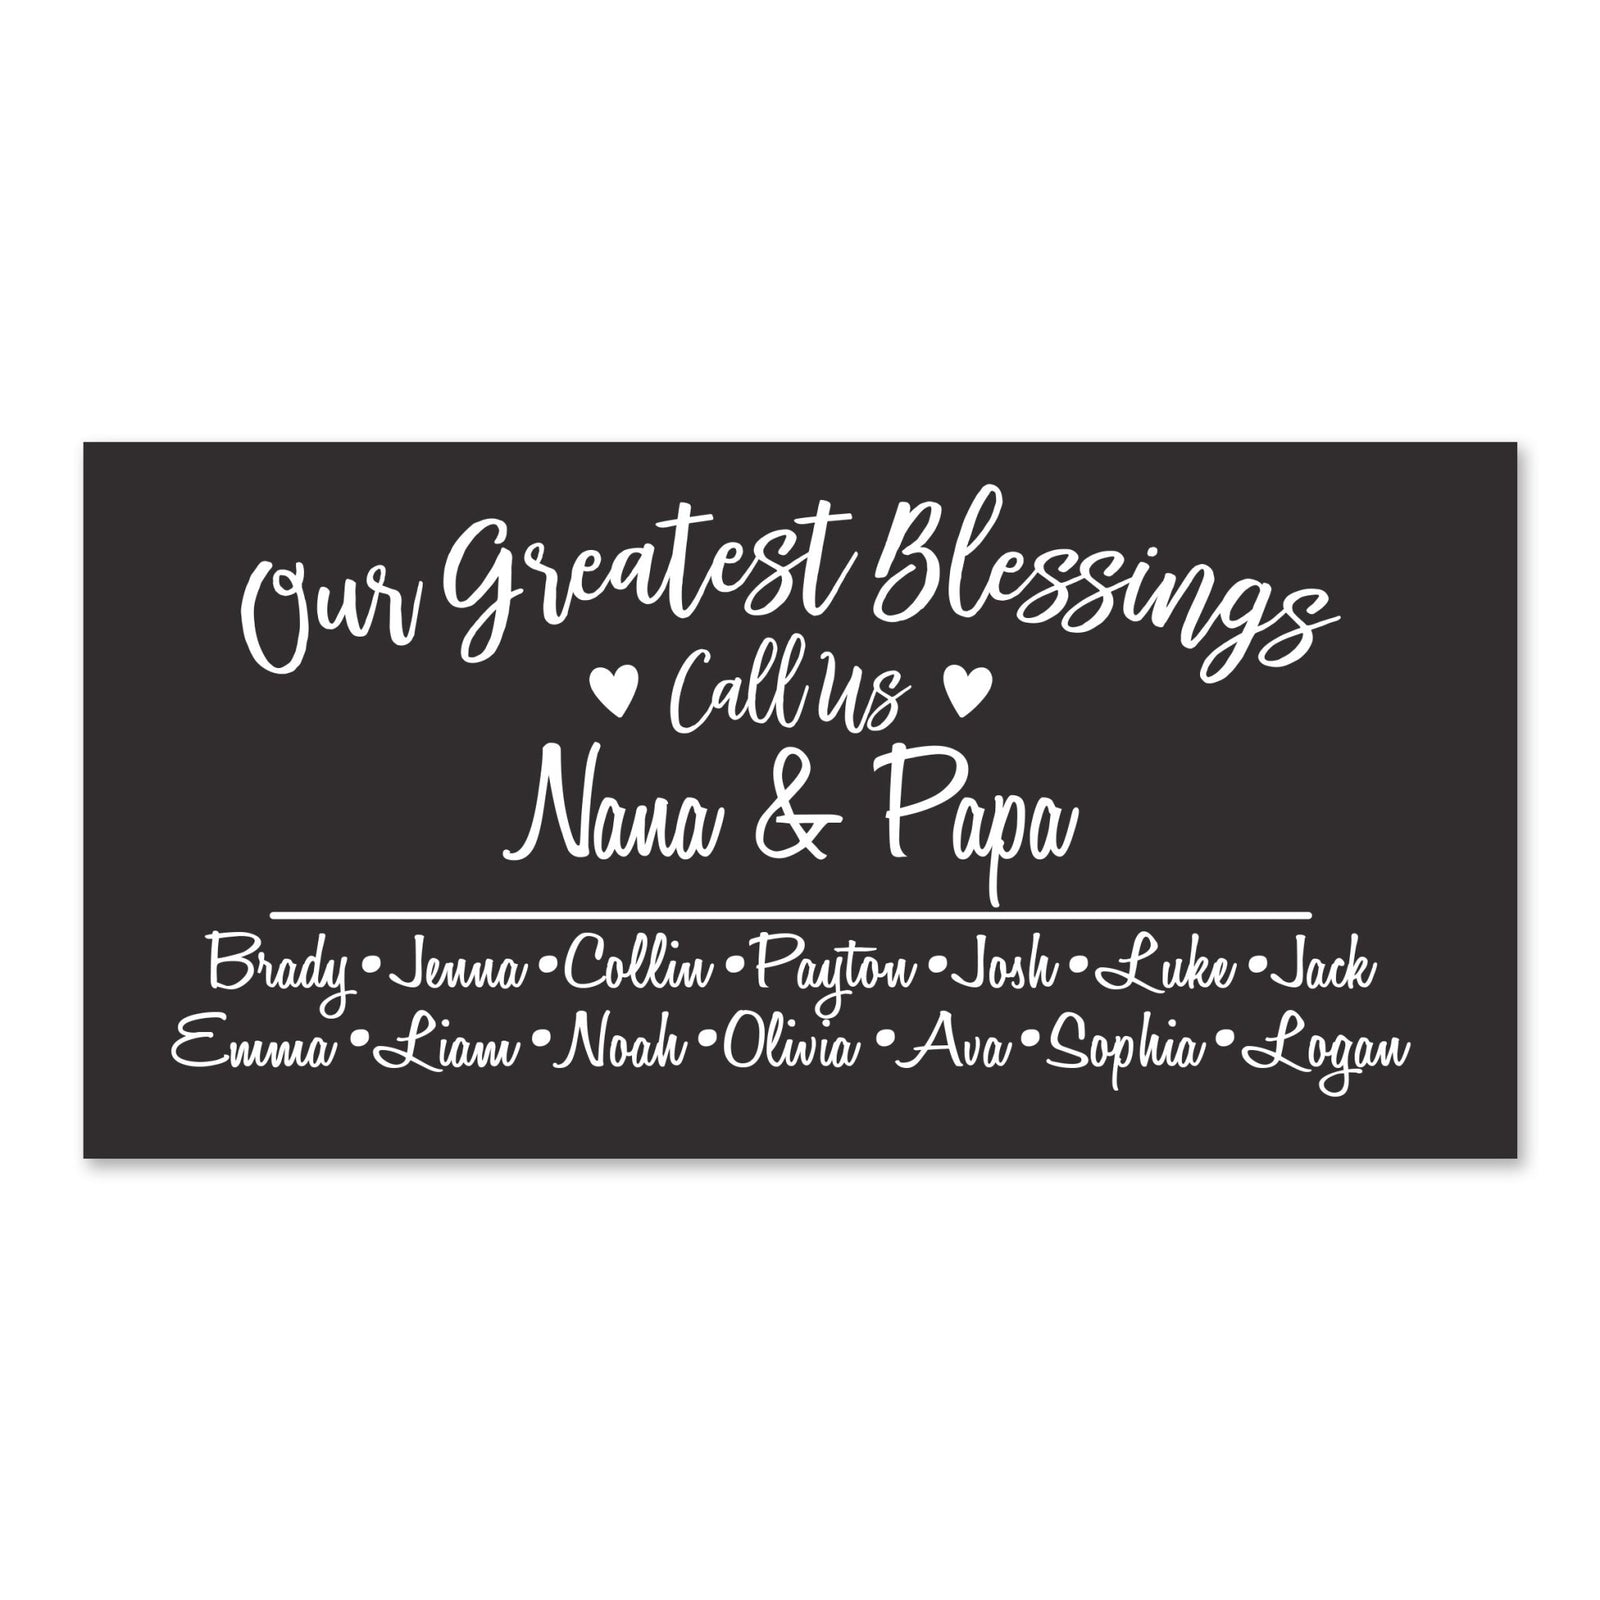 Personalized Grandparents Plaque Greatest Blessings - Nana & Papa - LifeSong Milestones